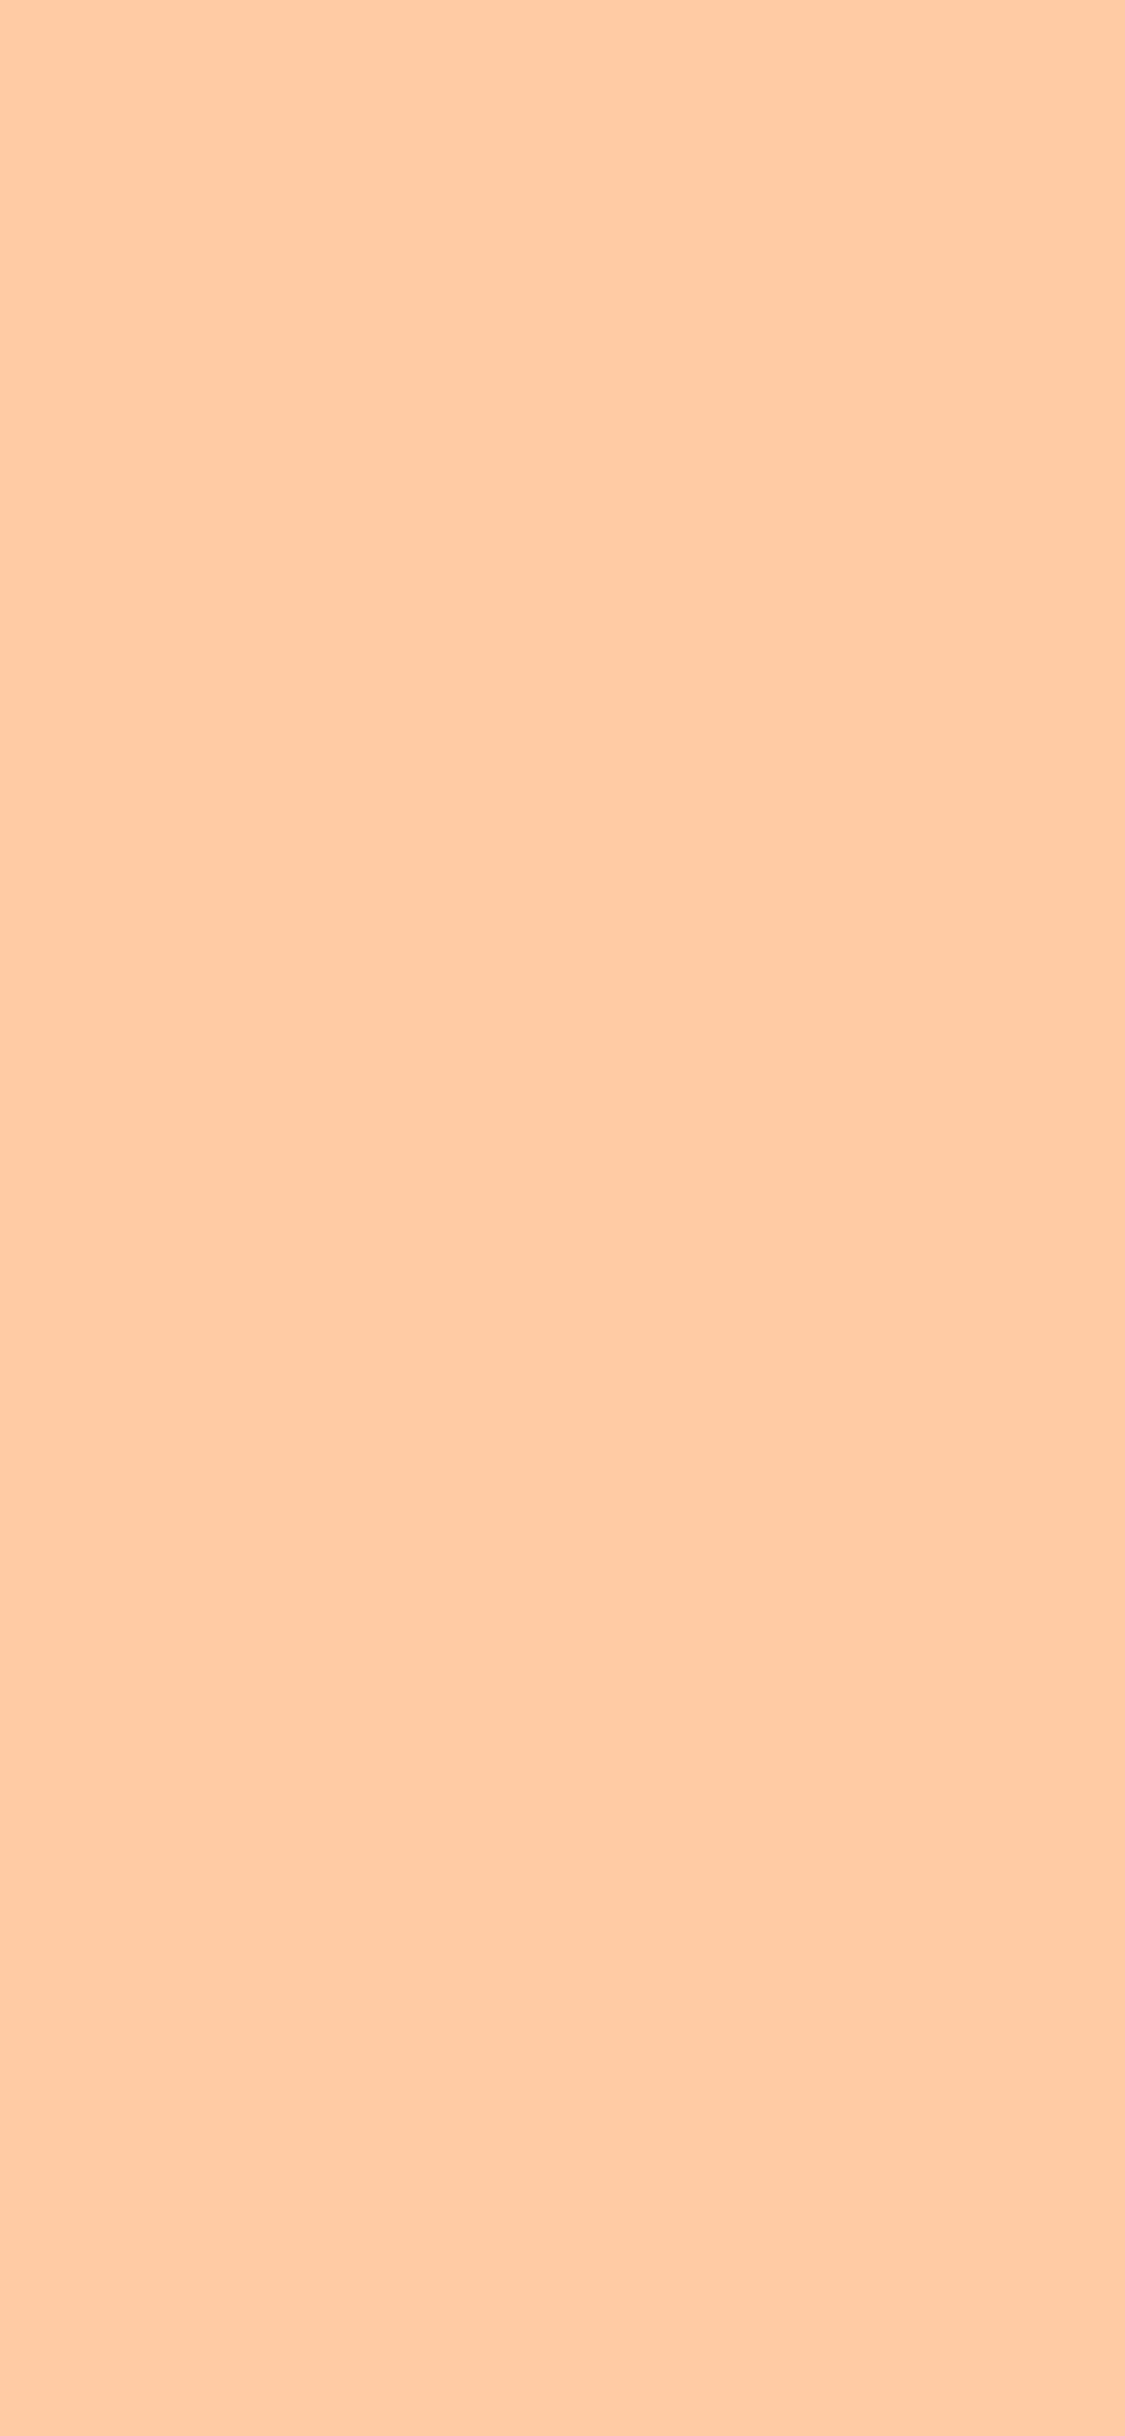 1125x2436 Deep Peach Solid Color Background